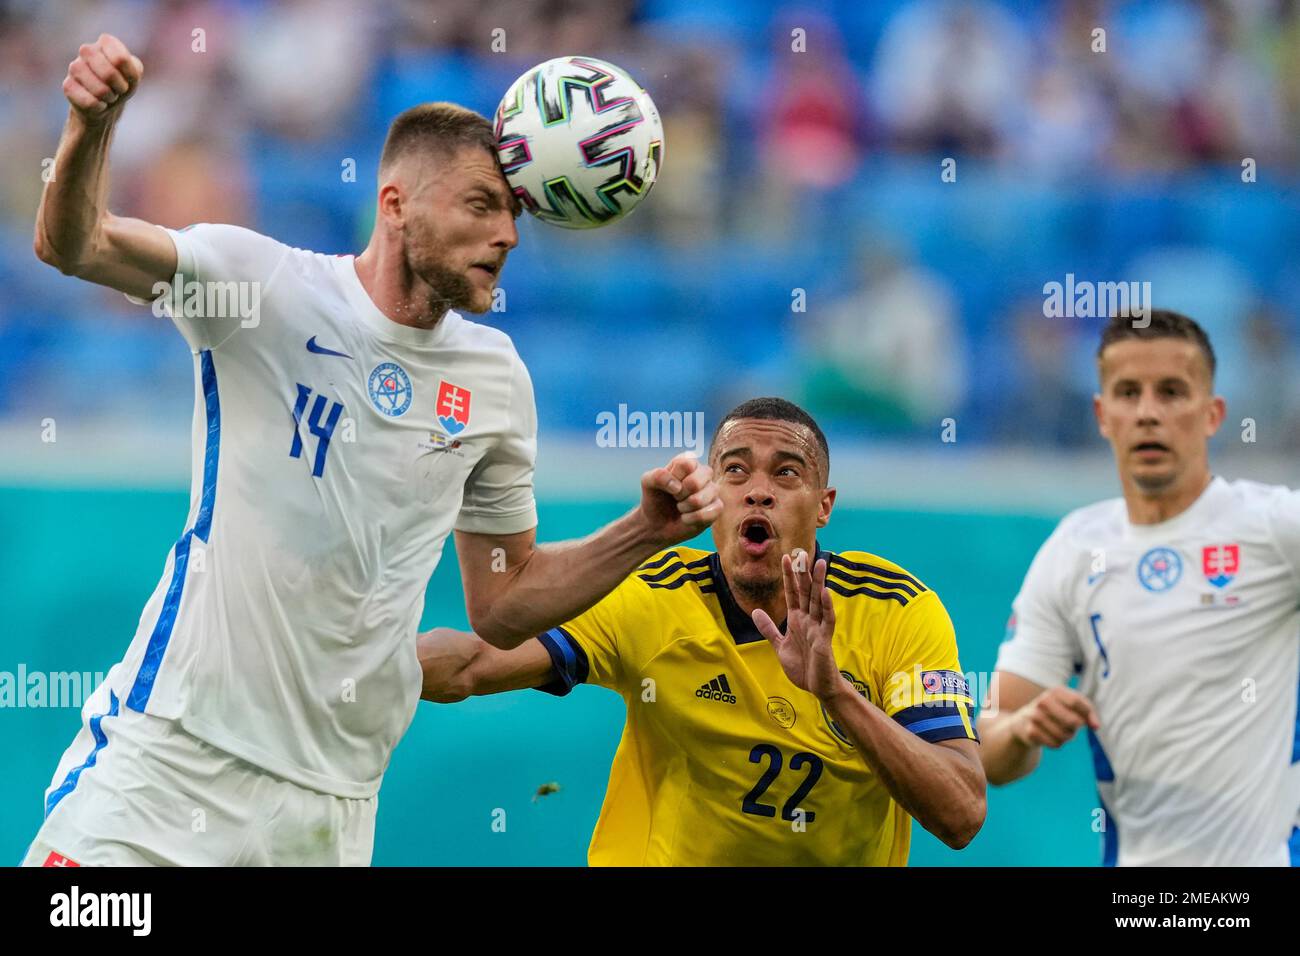 Slovakia's Milan Skriniar heads the ball as Sweden's Robin Quaison looks  on, during the Euro 2020 soccer championship group E match between Sweden  and Slovakia, at the Saint Petersburg stadium, in Saint